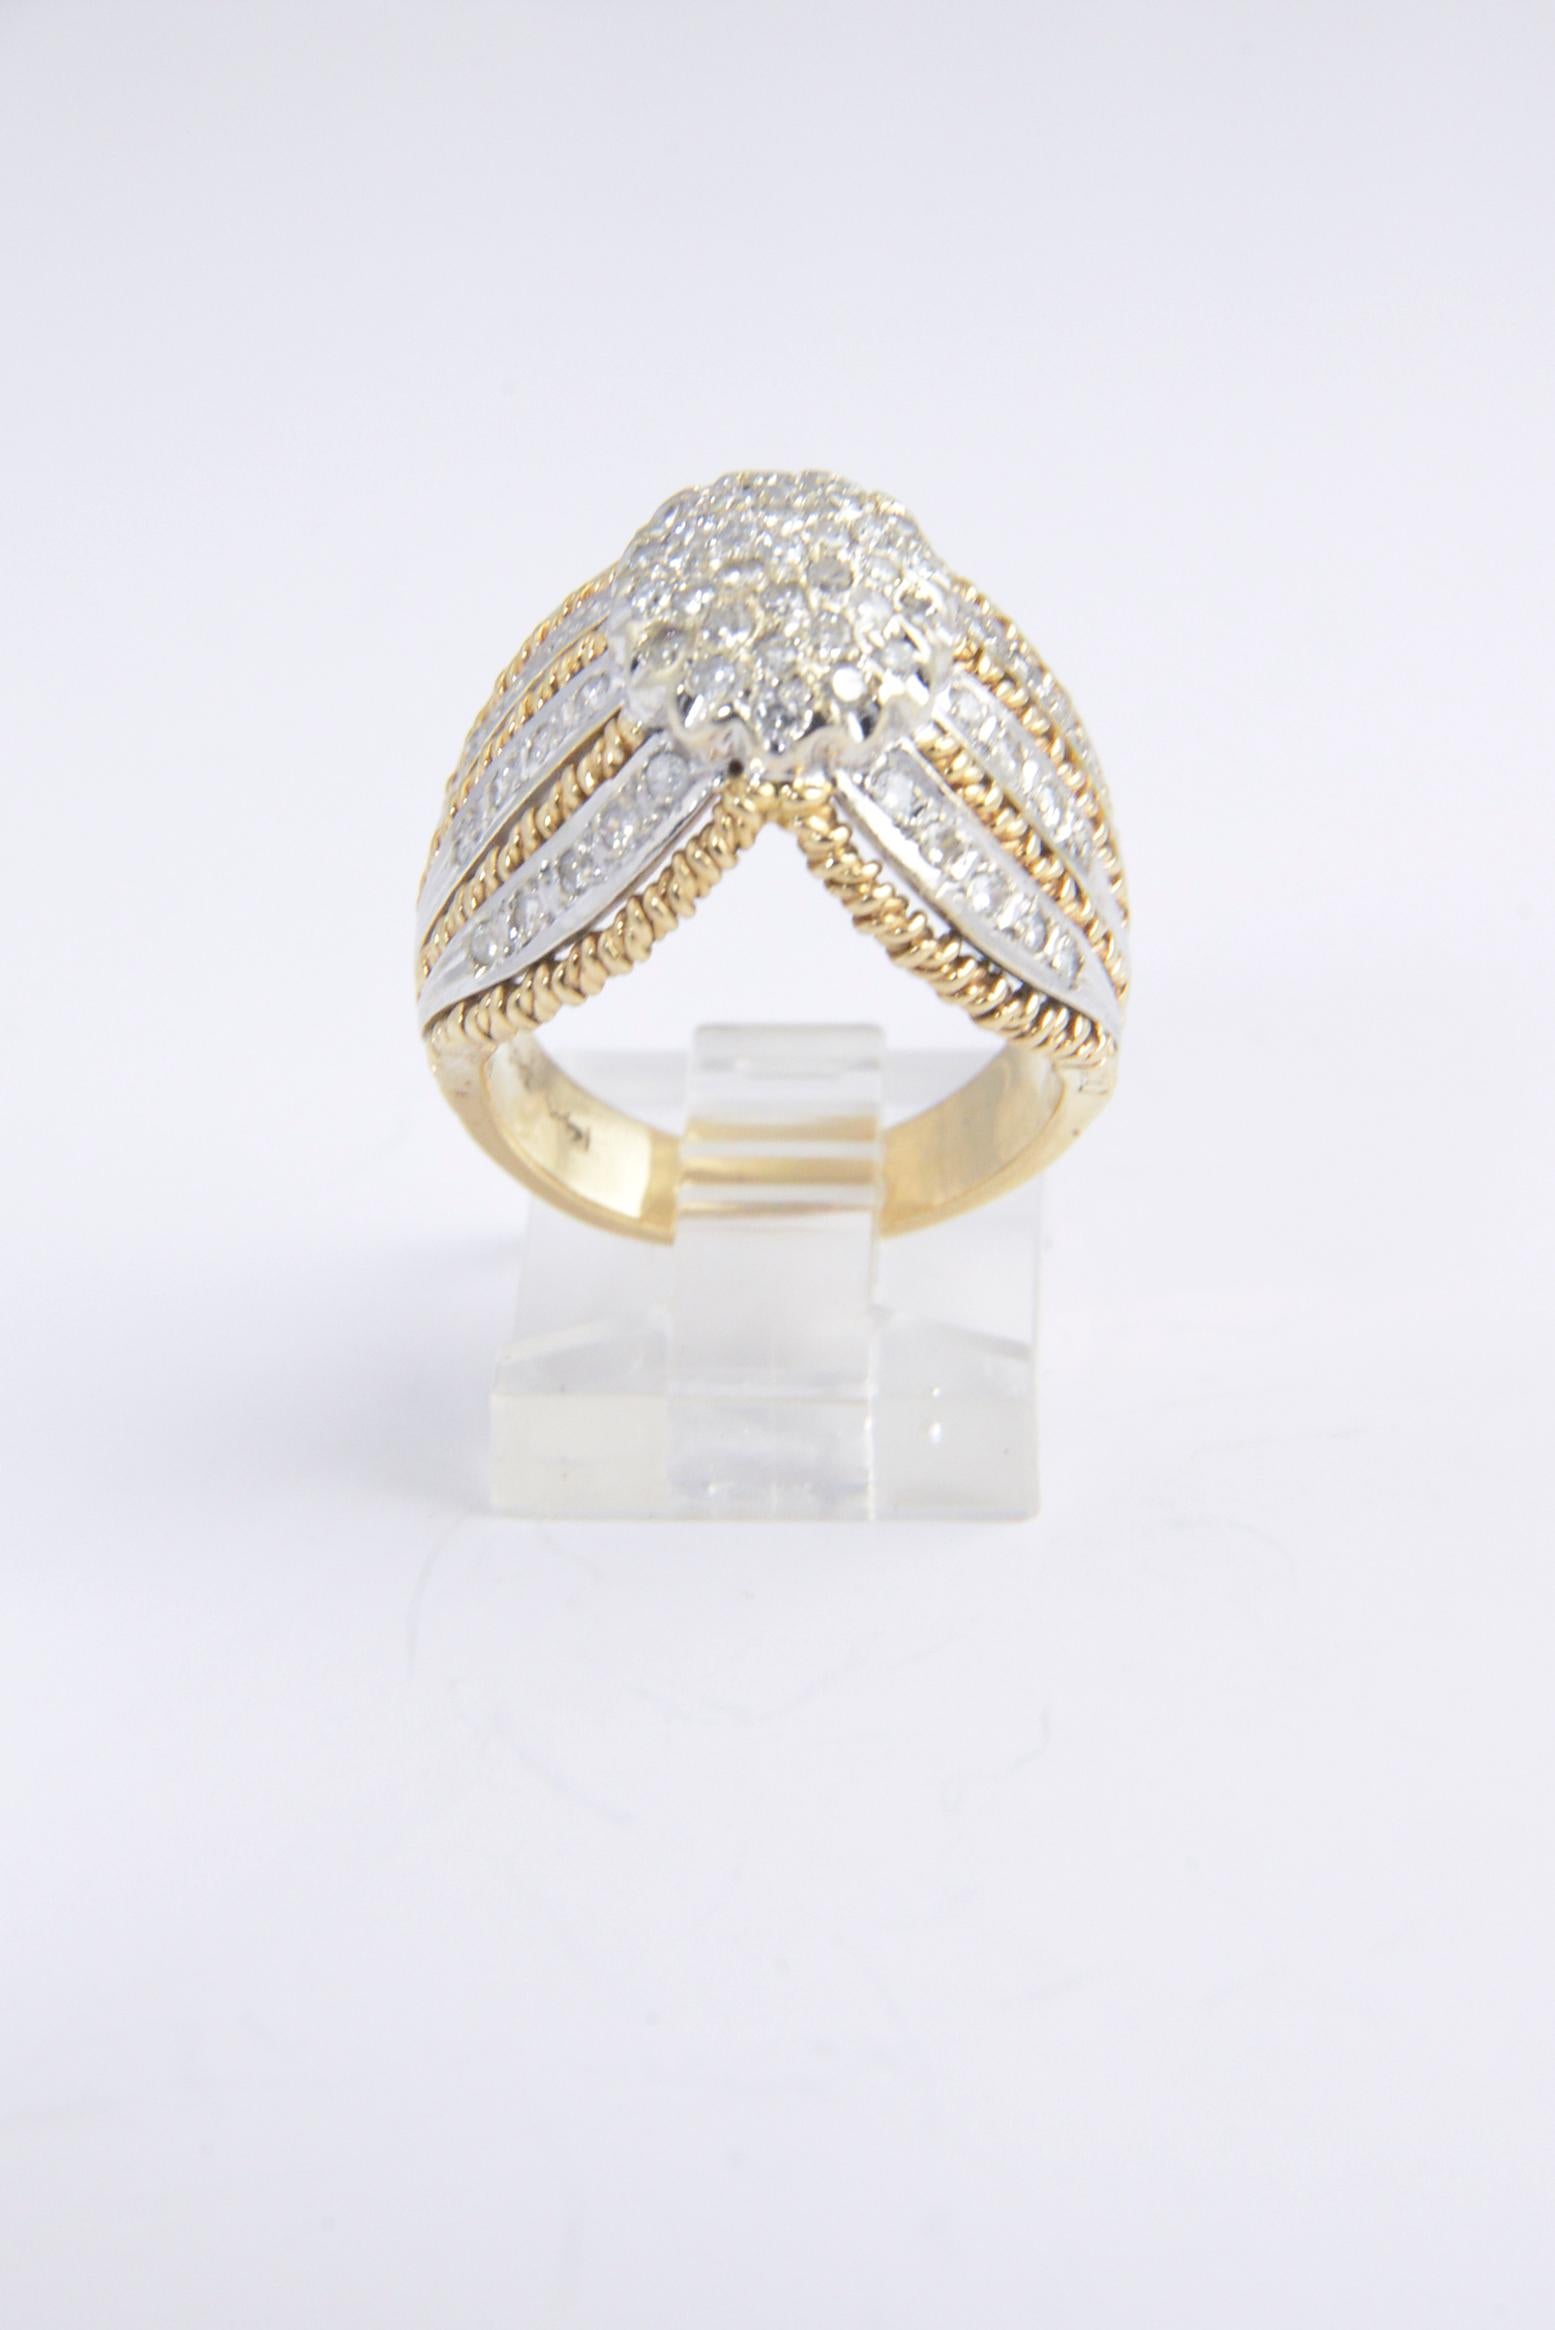 1970s 14K gold dome ring with diamonds set in white gold accented by yellow gold twisted edges.  There is approximately 1 carat of diamonds in the ring.
 Size: 6 1/4. Slight scratches on the band.